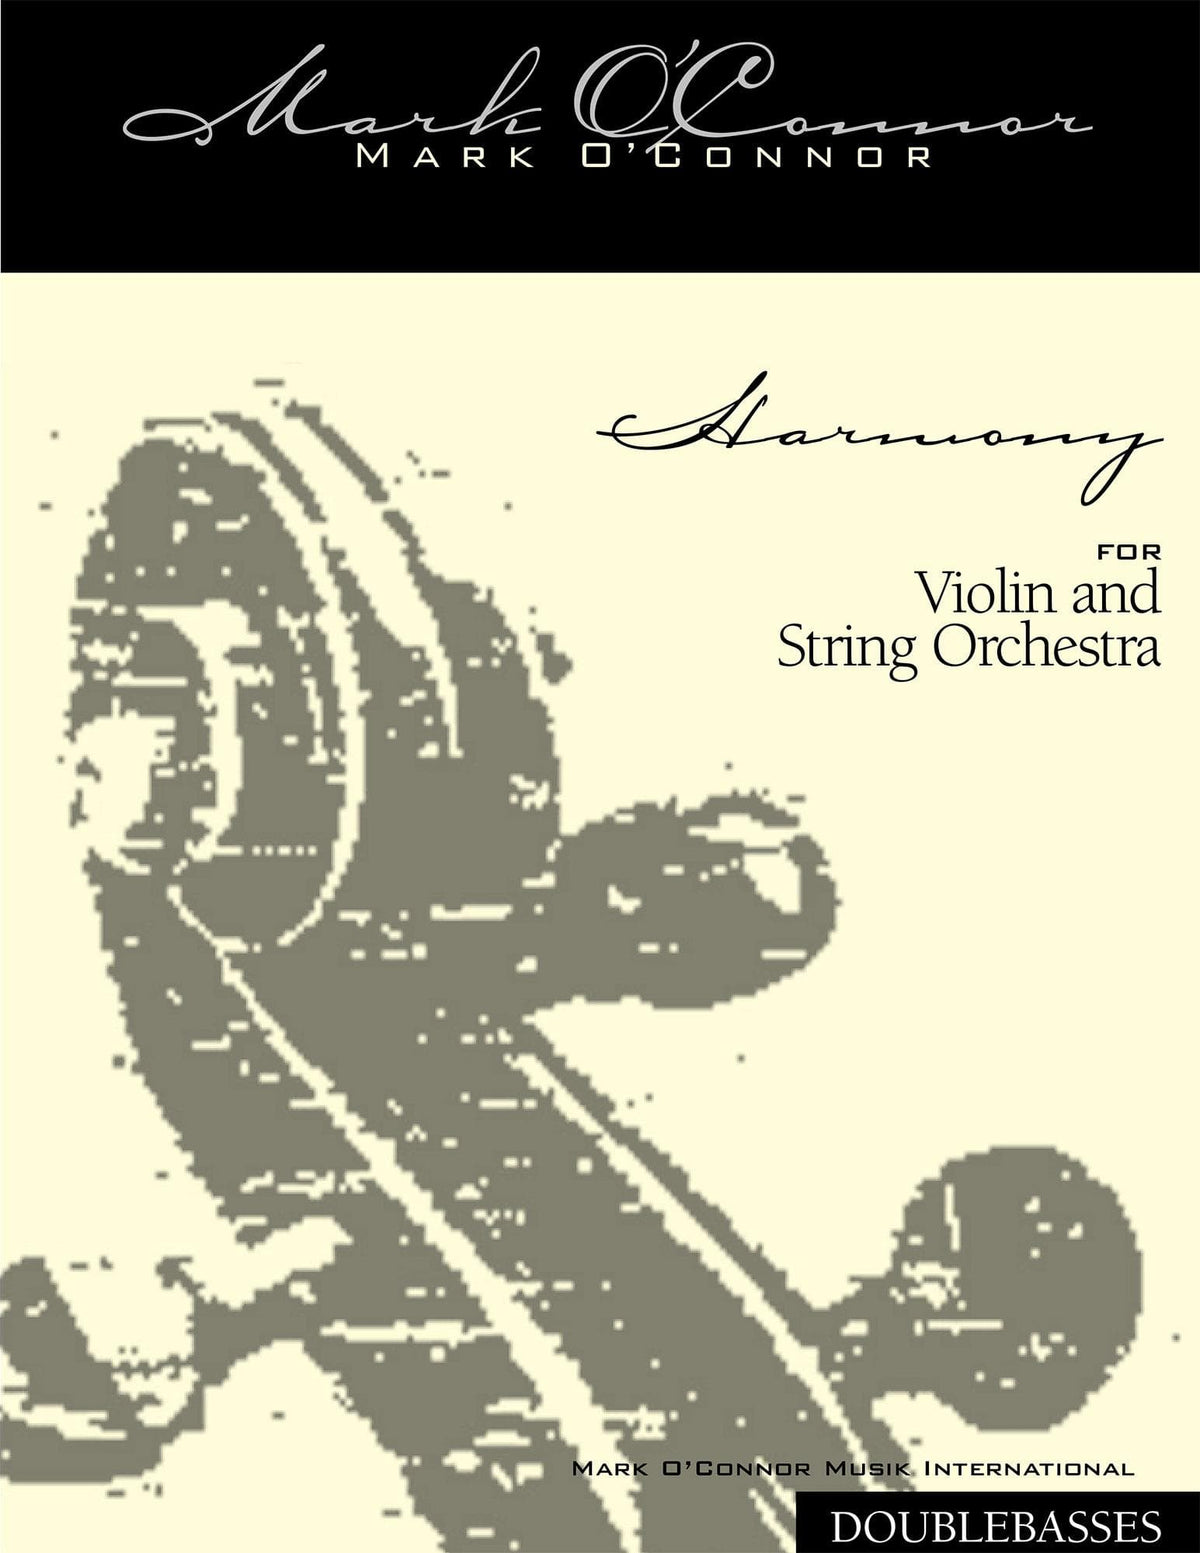 O'Connor, Mark - Harmony for Violin and Strings - Basses - Digital Download